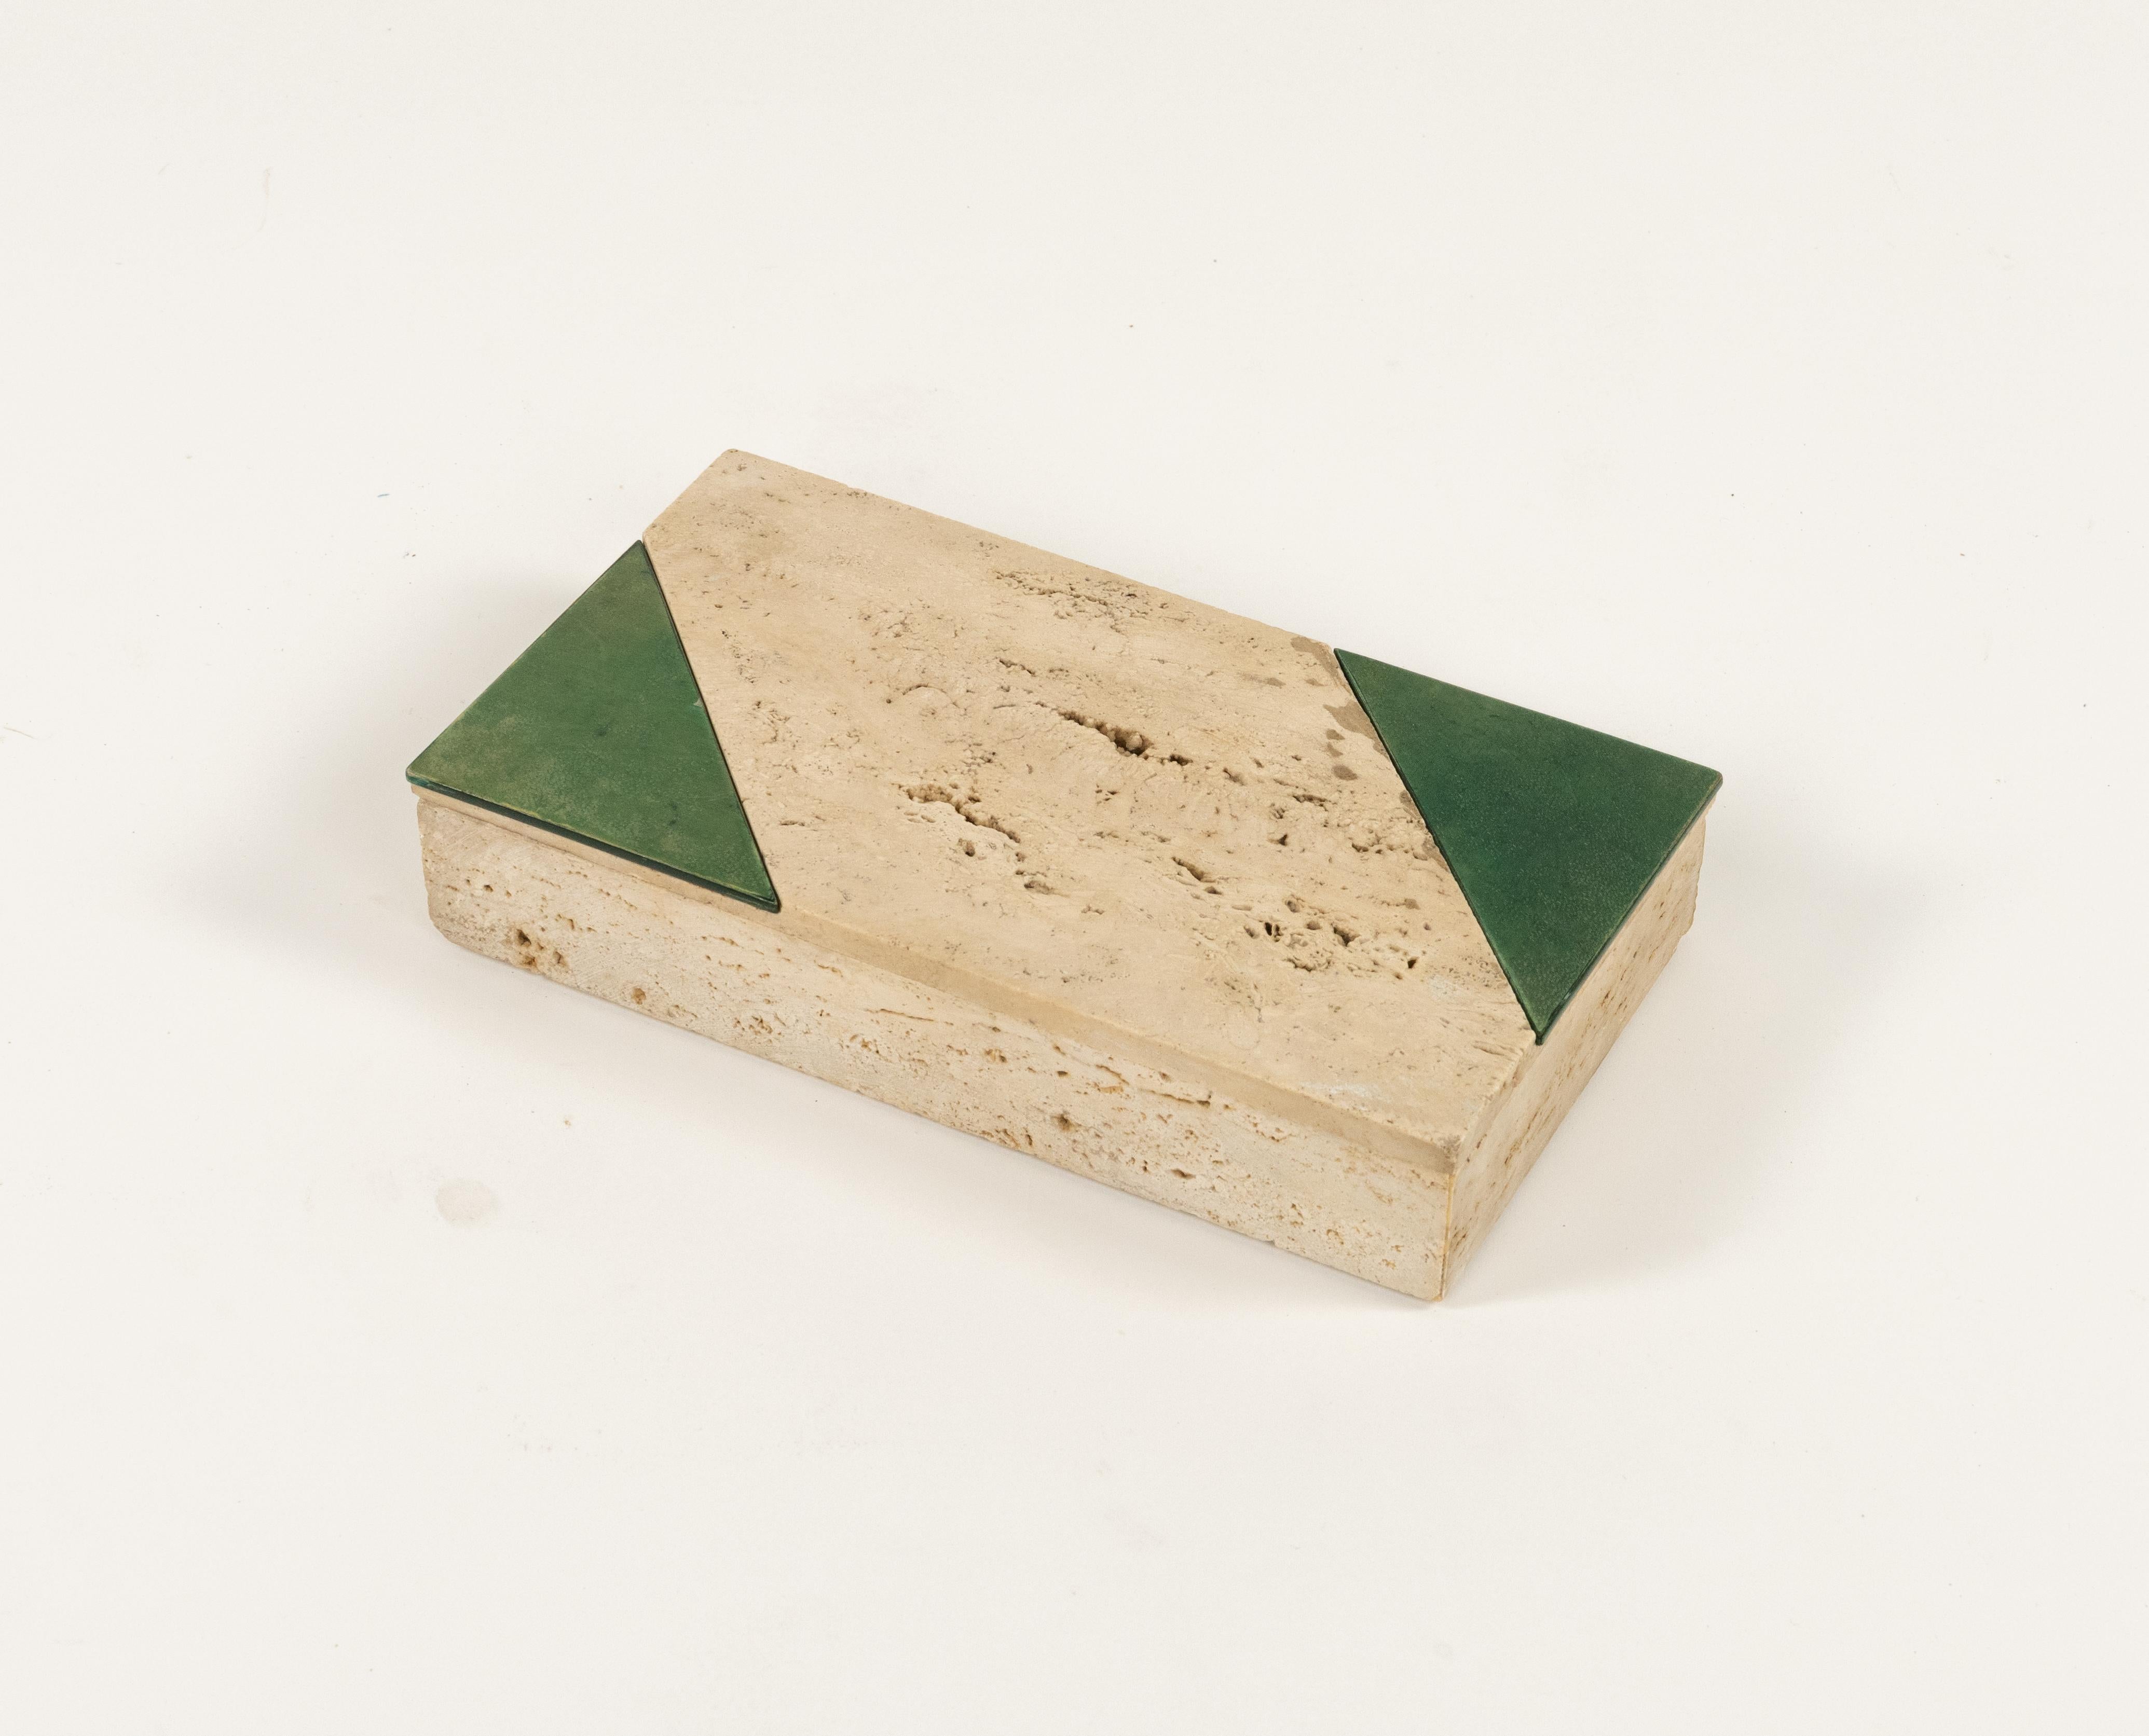 Midcentury beautiful rectangular box in travertine and green glazed tile in the style of Fratelli Mannelli.

Made in Italy in the 1970s.

Perfect desk object or gift idea.